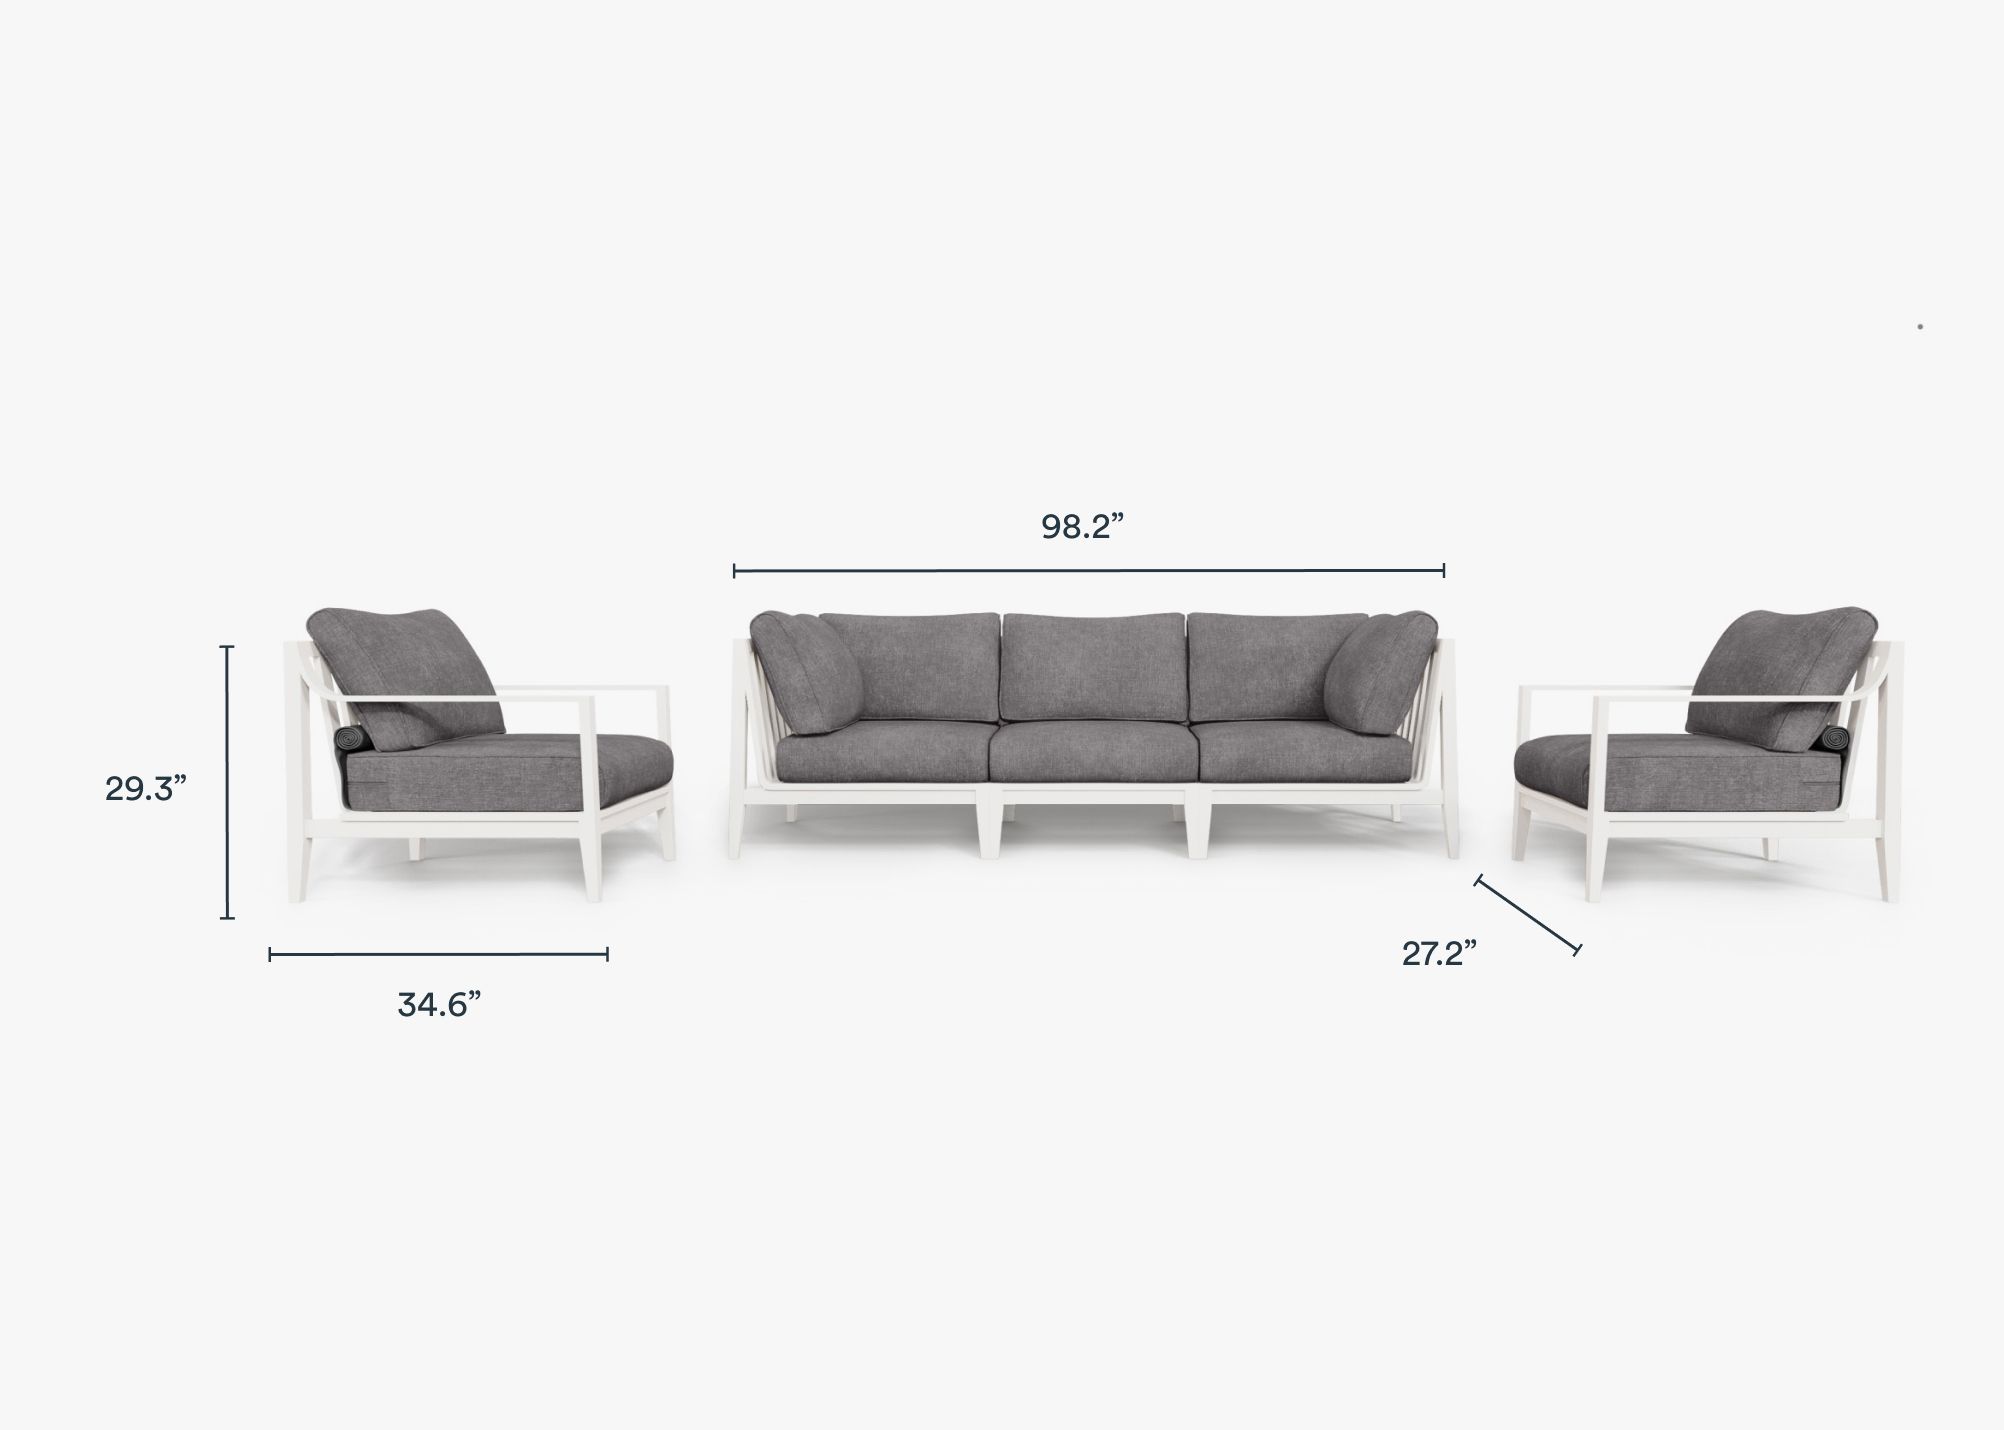 White Aluminum Outdoor Sofa with Armchairs - 5 Seat dimensions in inches, also listed under Dimensions and Weights.